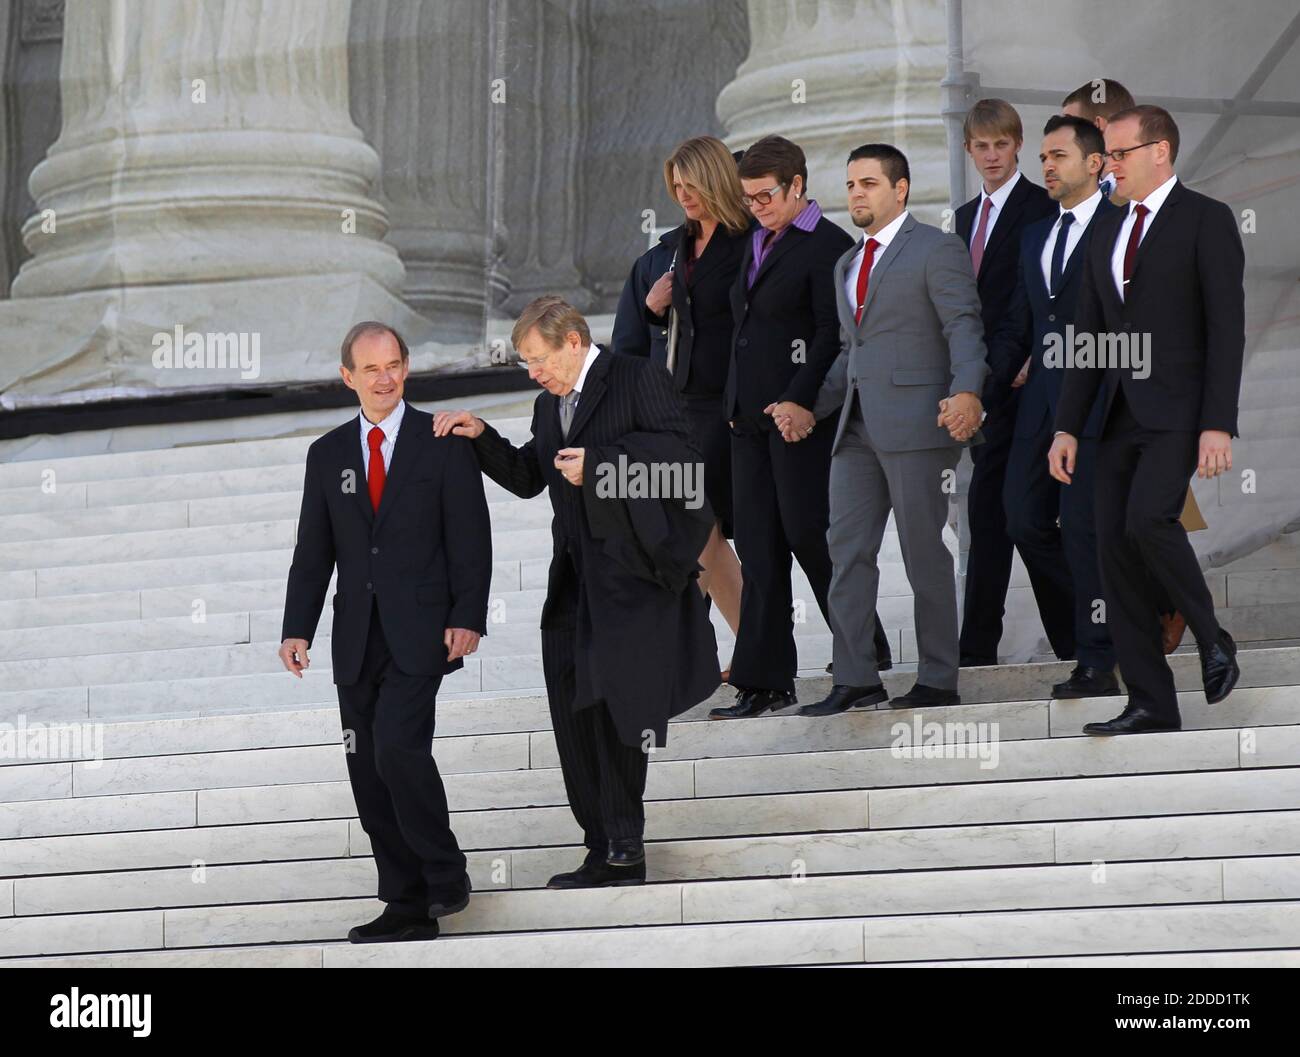 NO FILM, NO VIDEO, NO TV, NO DOCUMENTARY - Attorneys David Bois (front, left) and Ted Olson walk out of the U.S. Supreme Court followed by plaintiffs (from left) Sandy Stier, Kris Perry, Jeff Zarillo, Elliot Perry (son of Kris and Sandy), Paul Katami, and human rights advocate Chad Griffin, after California's Proposition 8 was argued before the Court in Washington, D.C., Tuesday, March 26, 2013. Photo by Molly Riley/MCT/ABACAPRESS.COM Stock Photo